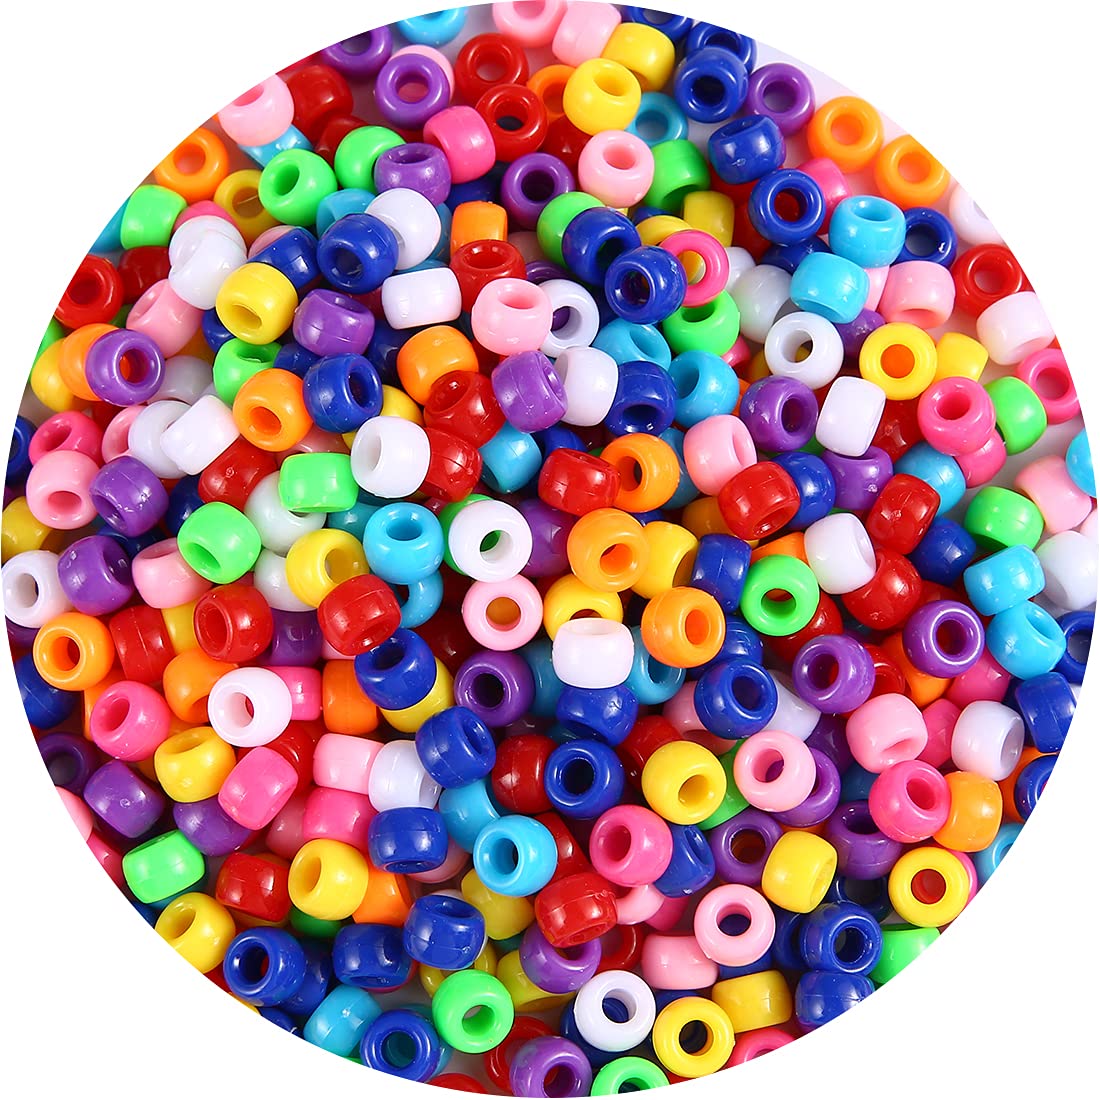 1000+ pcs Pony Beads, Multi-Colored Bracelet Beads, Beads for Hair Braids,  Beads for Crafts, Plastic Beads, Hair Beads for Braids (Medium Pack,  Classic) Medium Pack Classic